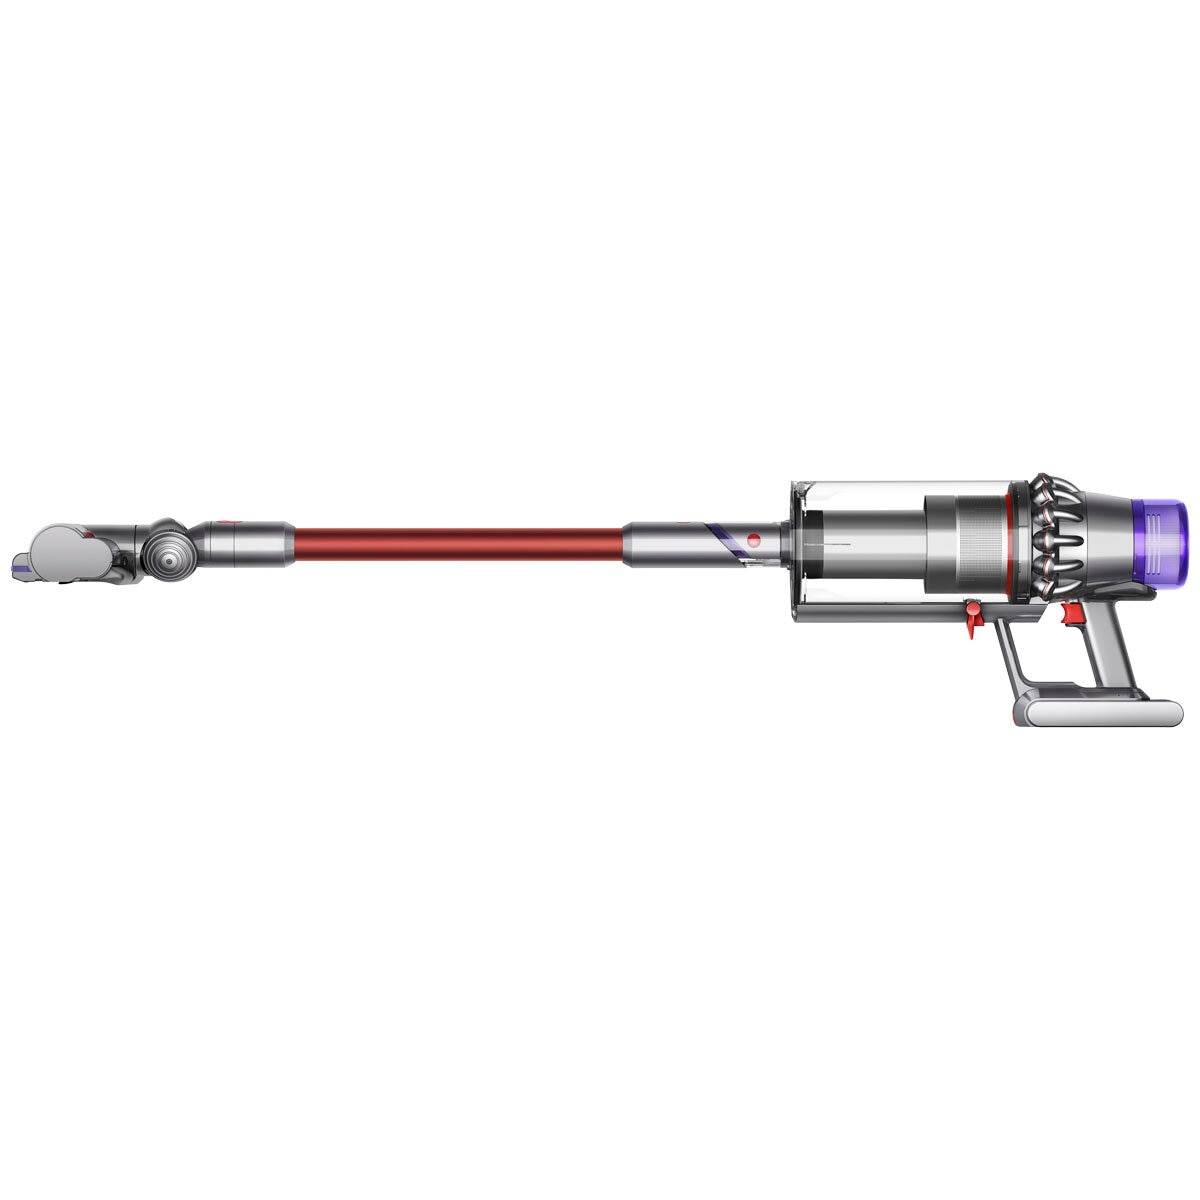 Dyson Outsize Absolute Stick Vacuum Cleaner 394102-01